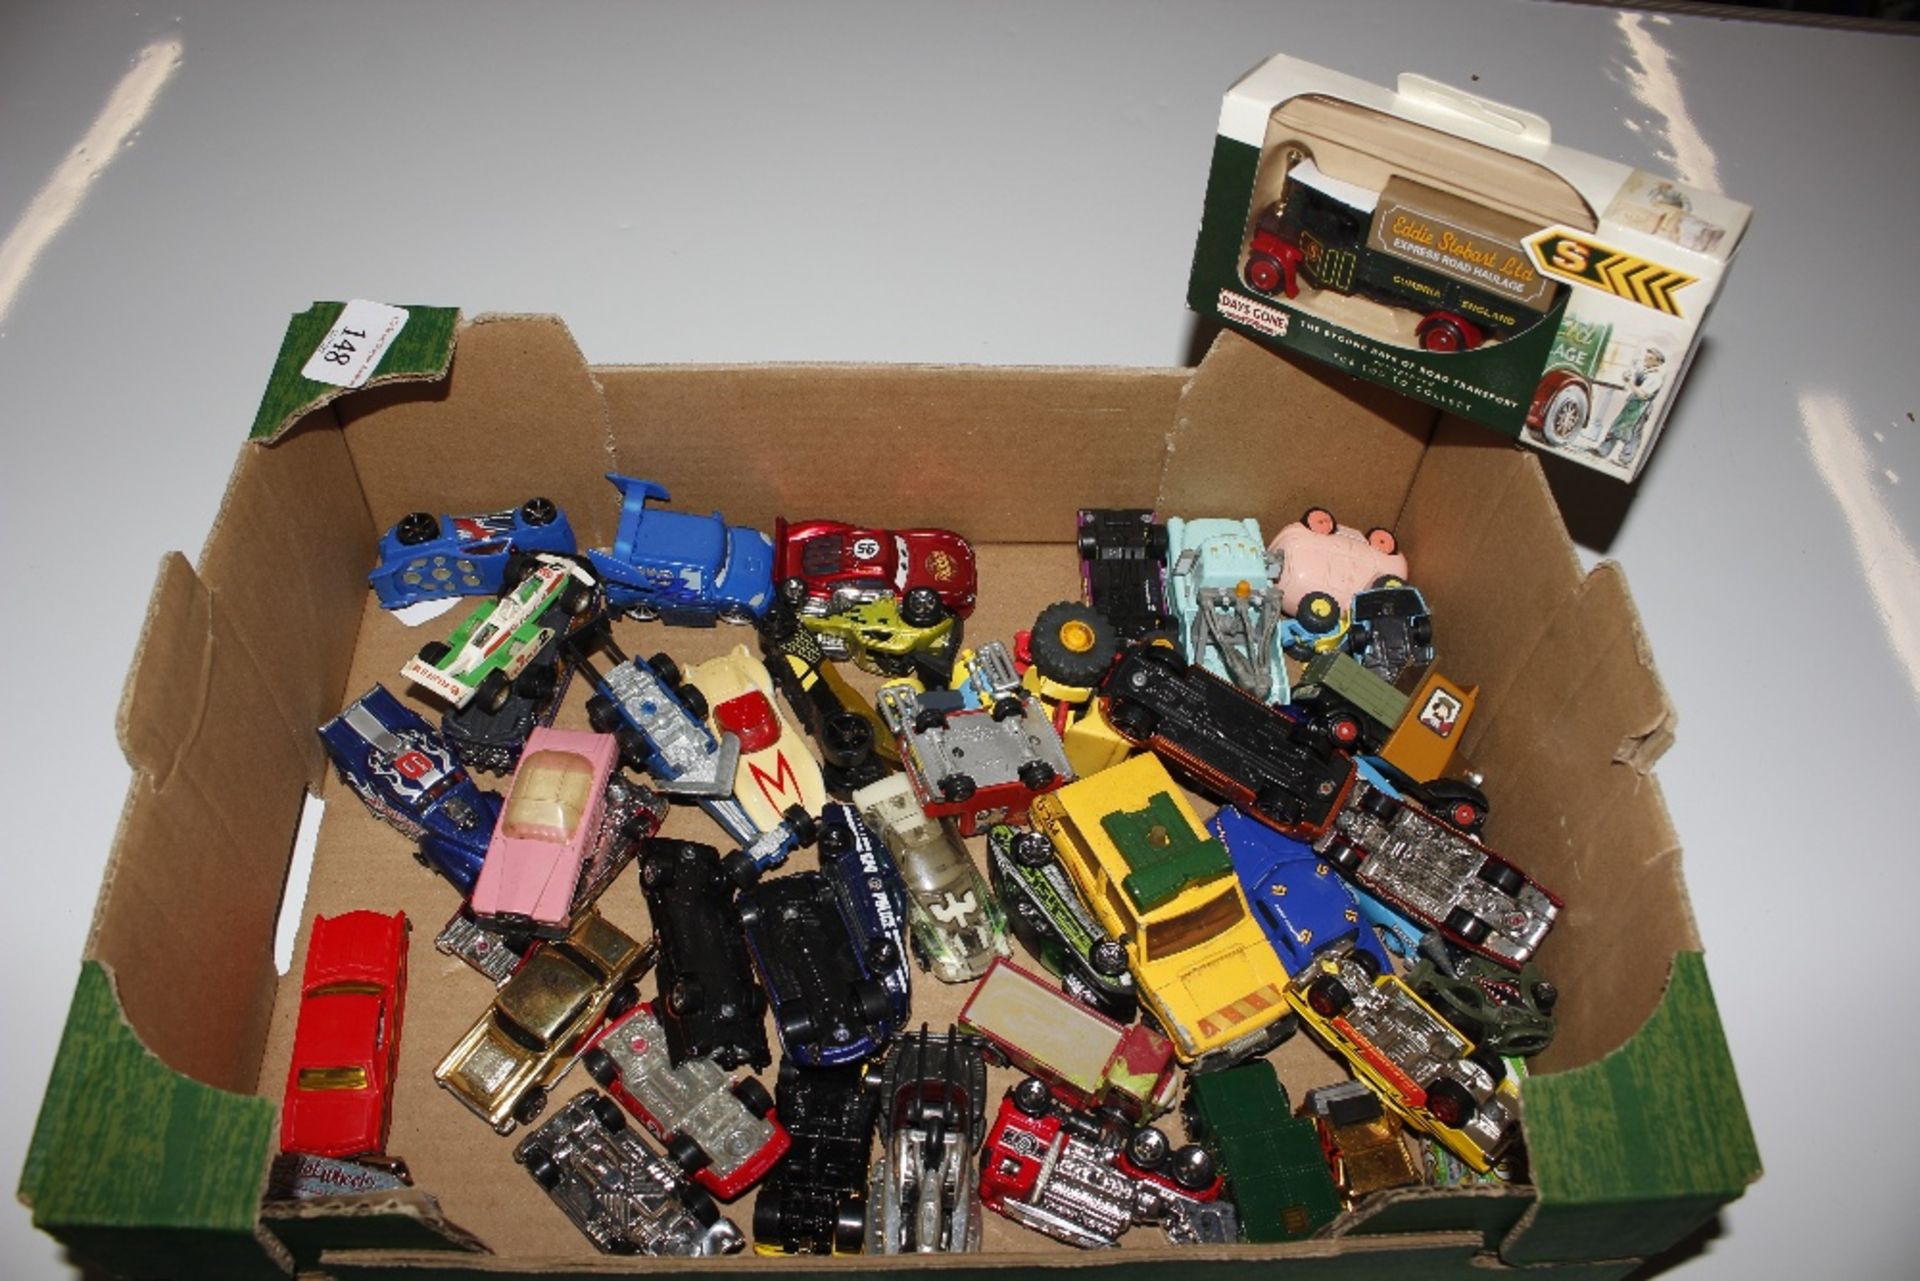 A tray box of miscellaneous die-cast model toys